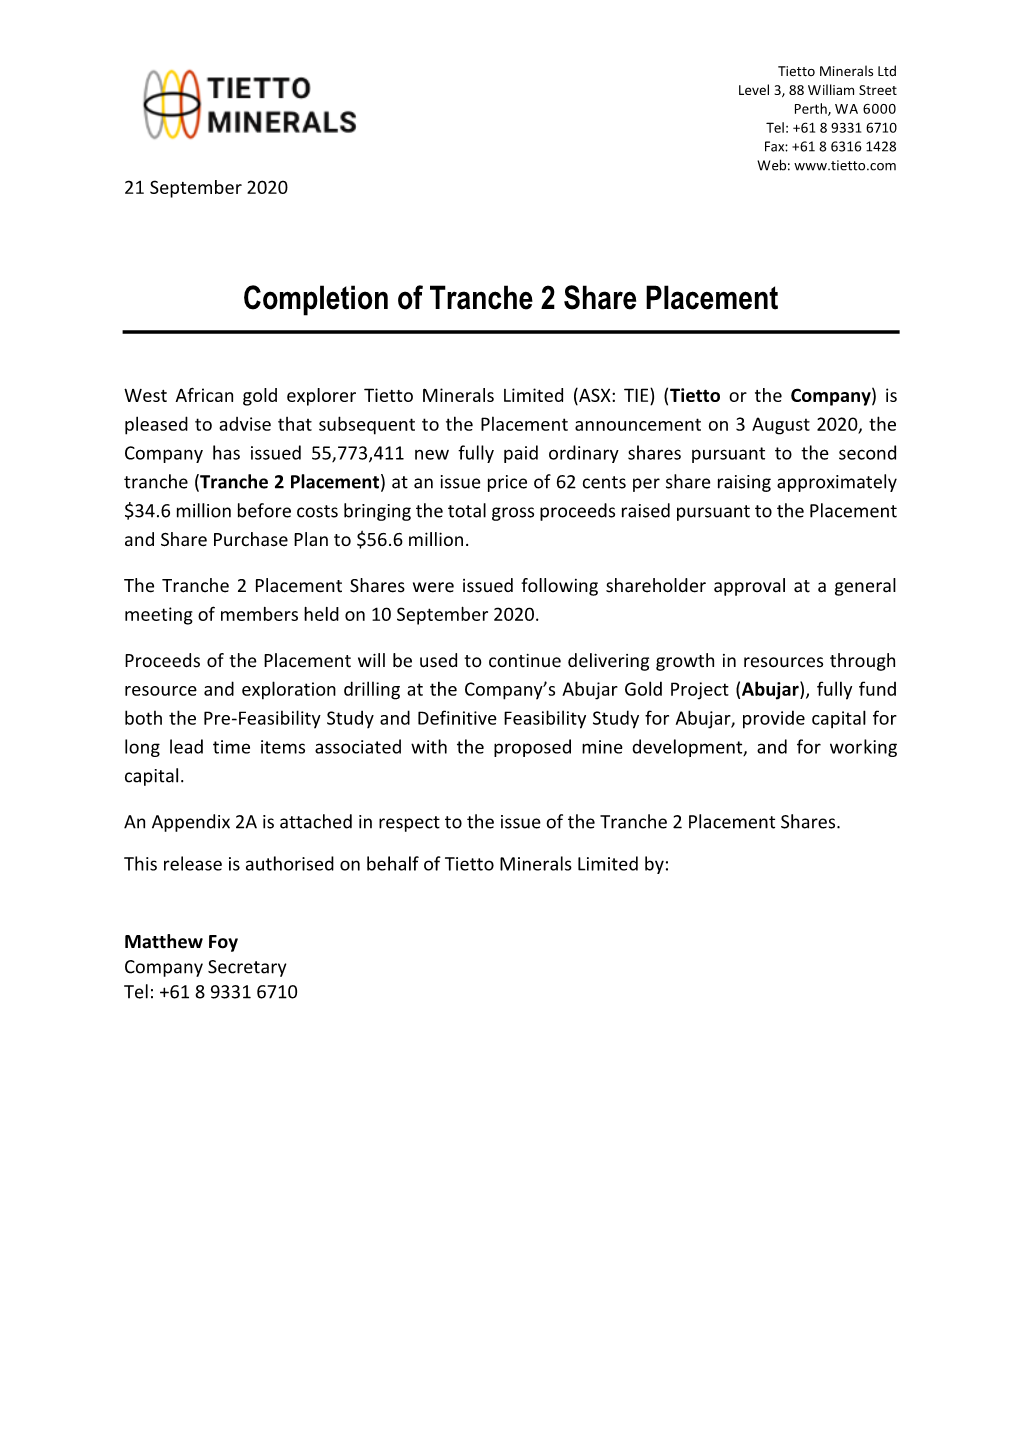 Completion of Tranche 2 Share Placement